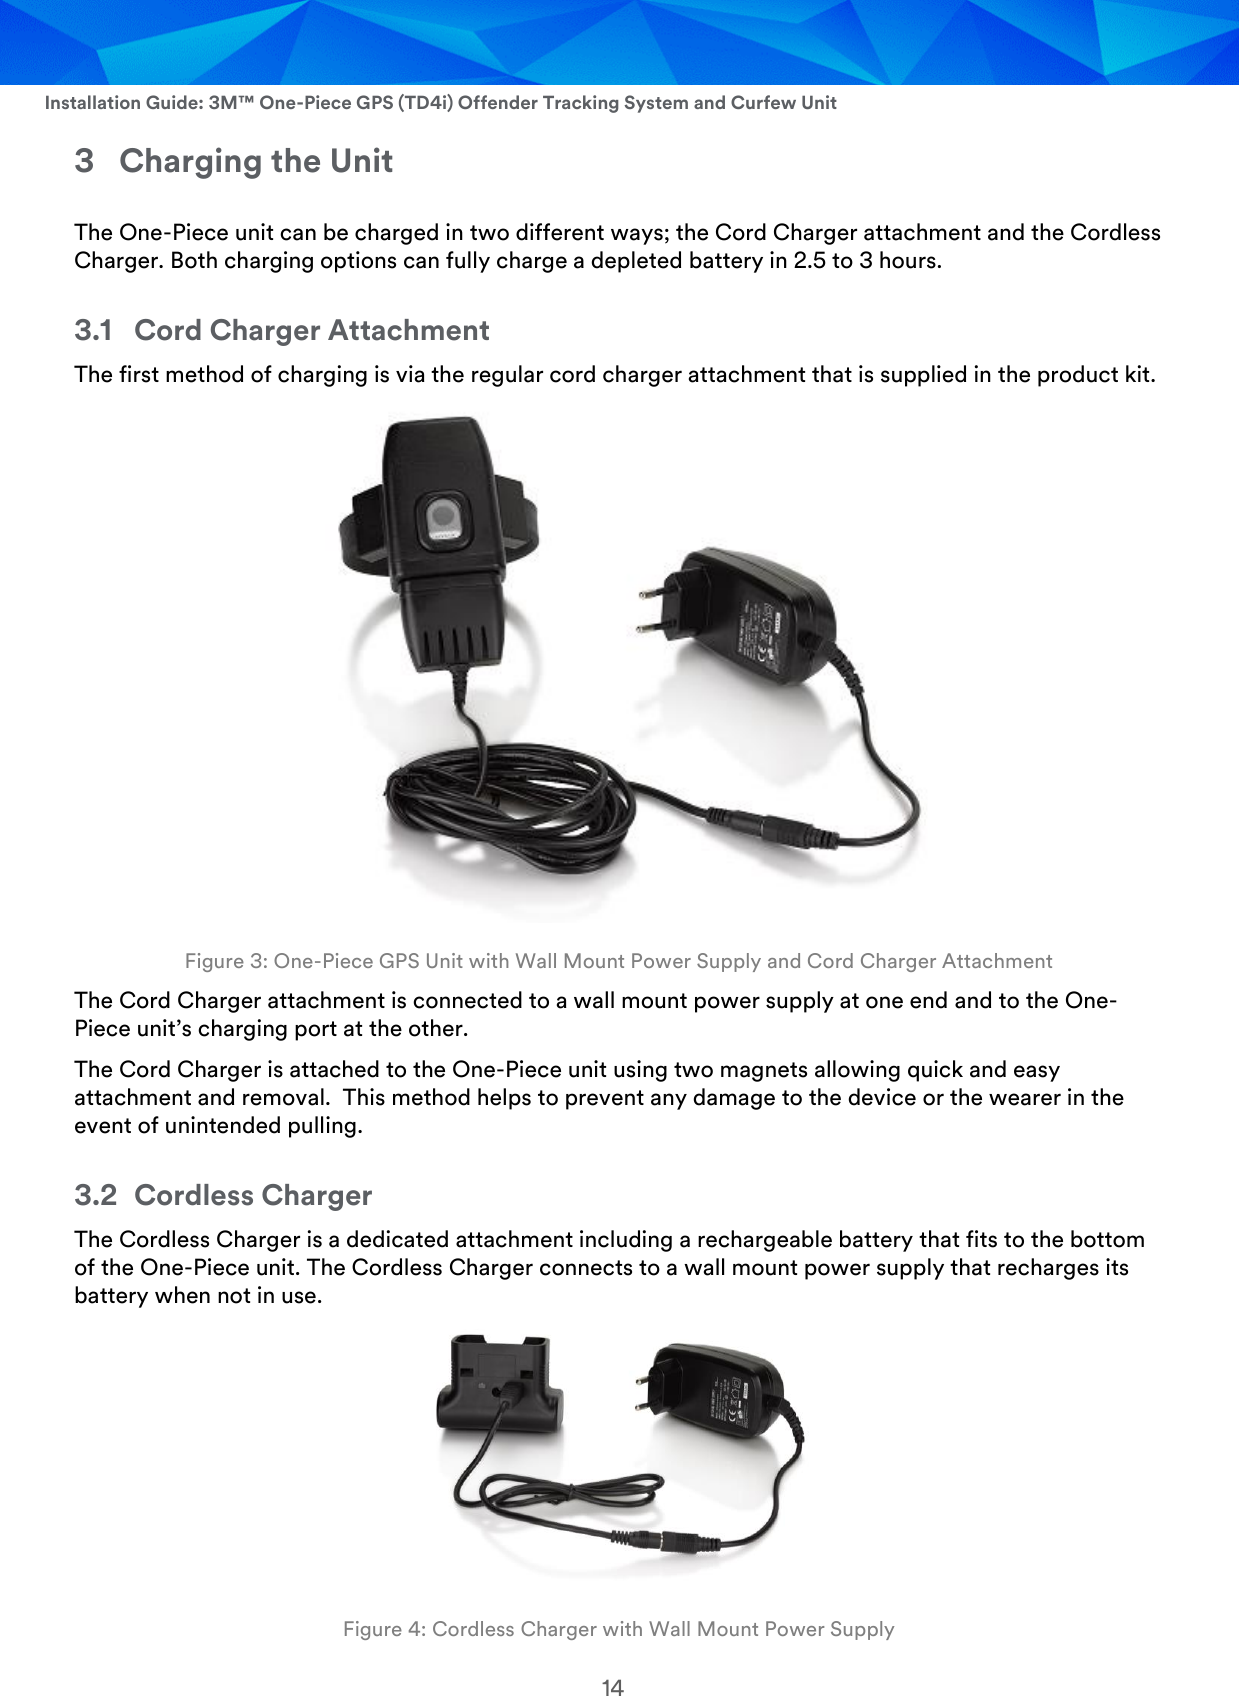  Installation Guide: 3M™ One-Piece GPS (TD4i) Offender Tracking System and Curfew Unit 14 3 Charging the Unit The One-Piece unit can be charged in two different ways; the Cord Charger attachment and the Cordless Charger. Both charging options can fully charge a depleted battery in 2.5 to 3 hours. 3.1 Cord Charger Attachment The first method of charging is via the regular cord charger attachment that is supplied in the product kit.   Figure 3: One-Piece GPS Unit with Wall Mount Power Supply and Cord Charger Attachment The Cord Charger attachment is connected to a wall mount power supply at one end and to the One-Piece unit’s charging port at the other.  The Cord Charger is attached to the One-Piece unit using two magnets allowing quick and easy attachment and removal.  This method helps to prevent any damage to the device or the wearer in the event of unintended pulling. 3.2 Cordless Charger The Cordless Charger is a dedicated attachment including a rechargeable battery that fits to the bottom of the One-Piece unit. The Cordless Charger connects to a wall mount power supply that recharges its battery when not in use.   Figure 4: Cordless Charger with Wall Mount Power Supply 